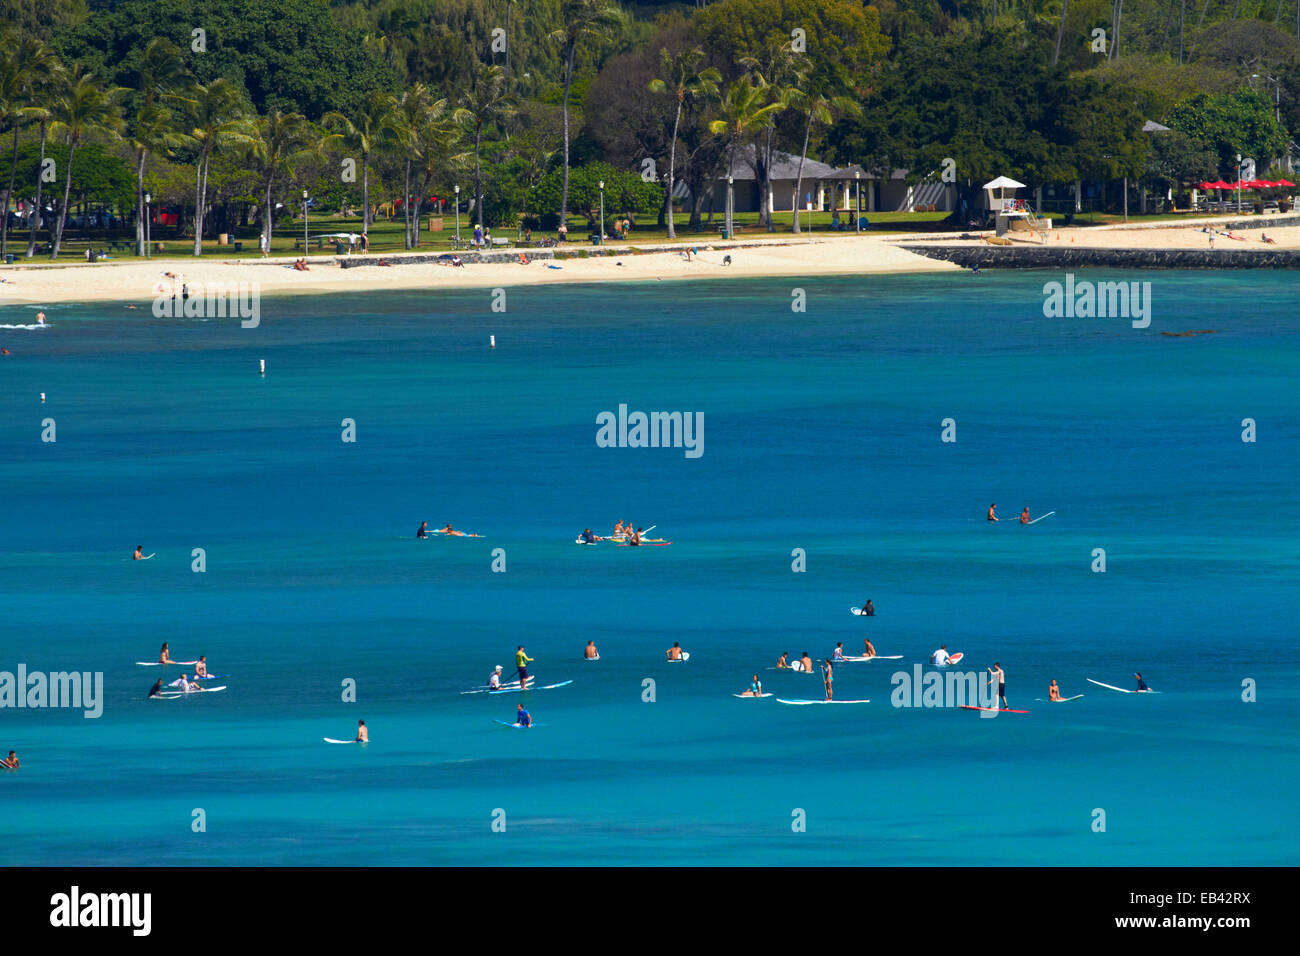 Les surfeurs et Stand Up Paddle boarders, Waikiki, Honolulu, Oahu, Hawaii, USA Banque D'Images